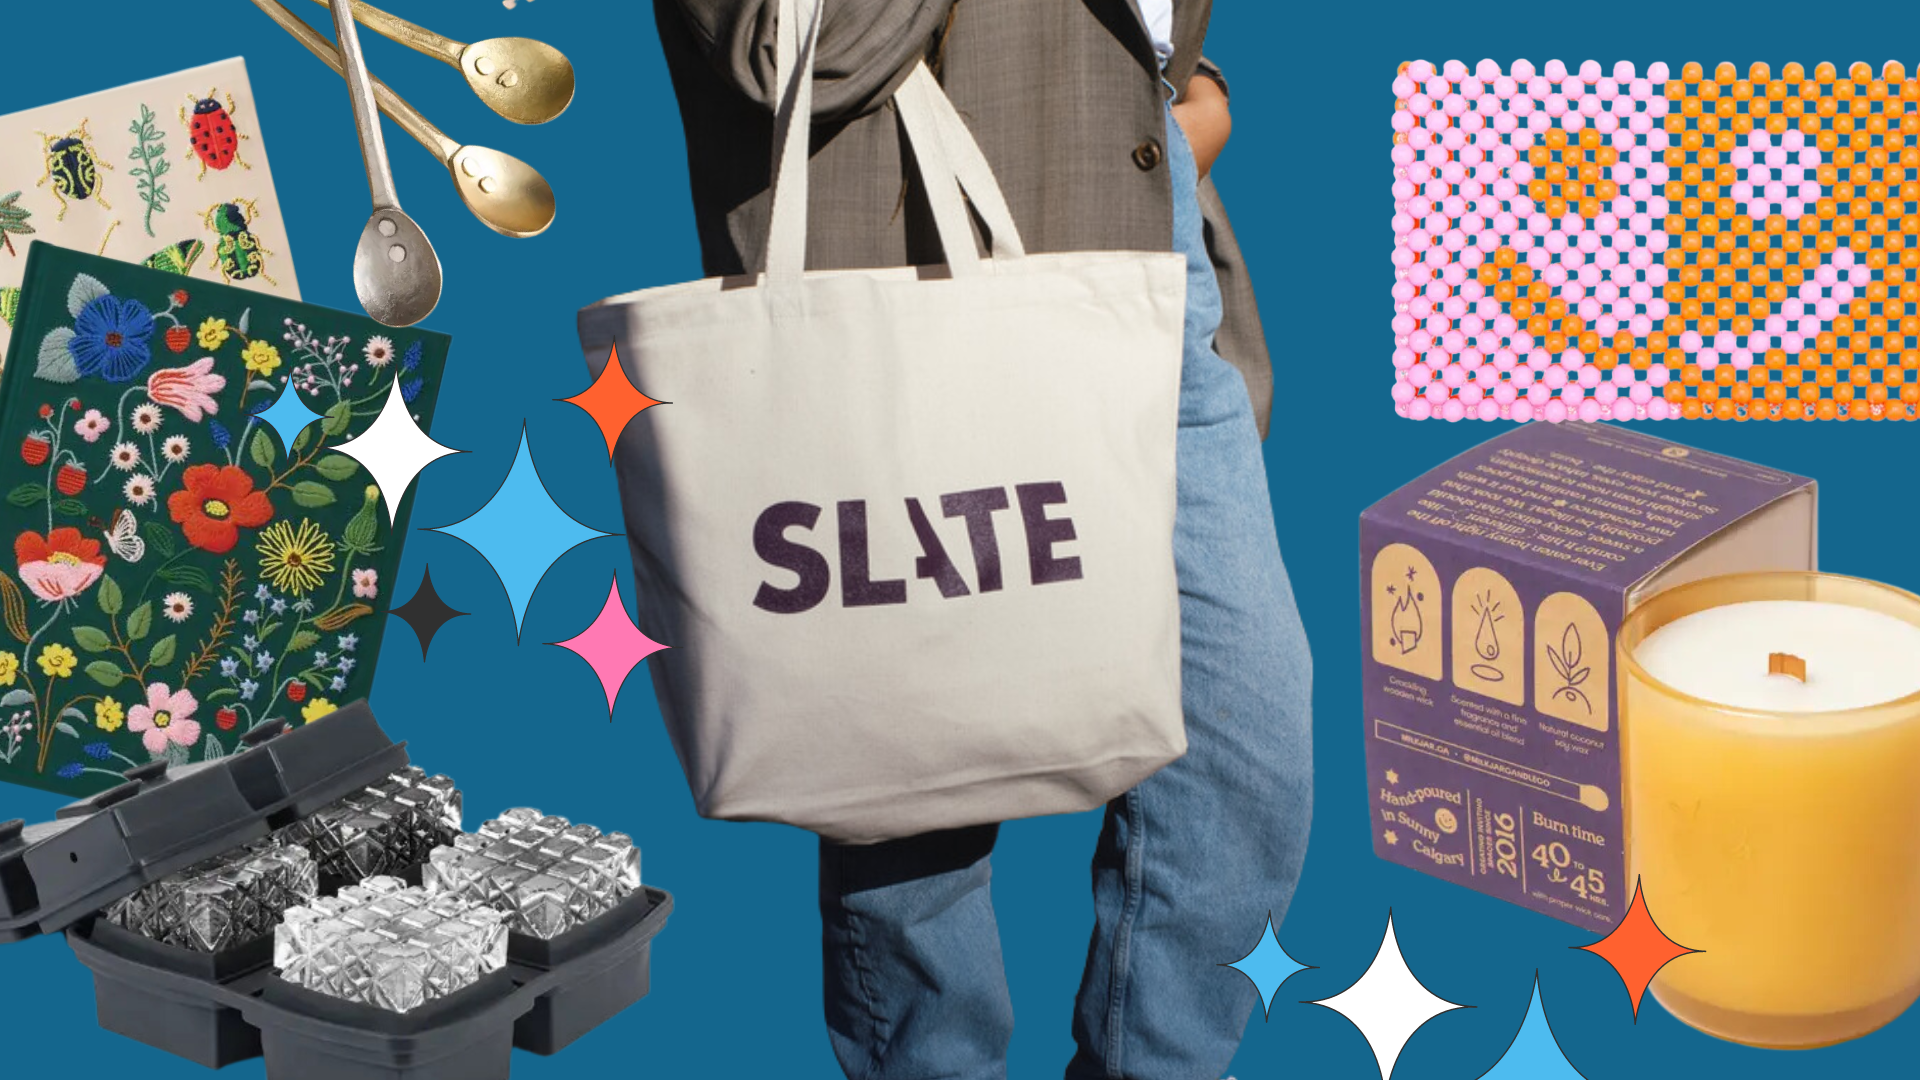 Slate's guide to unusual but useful gifts to delight your family.